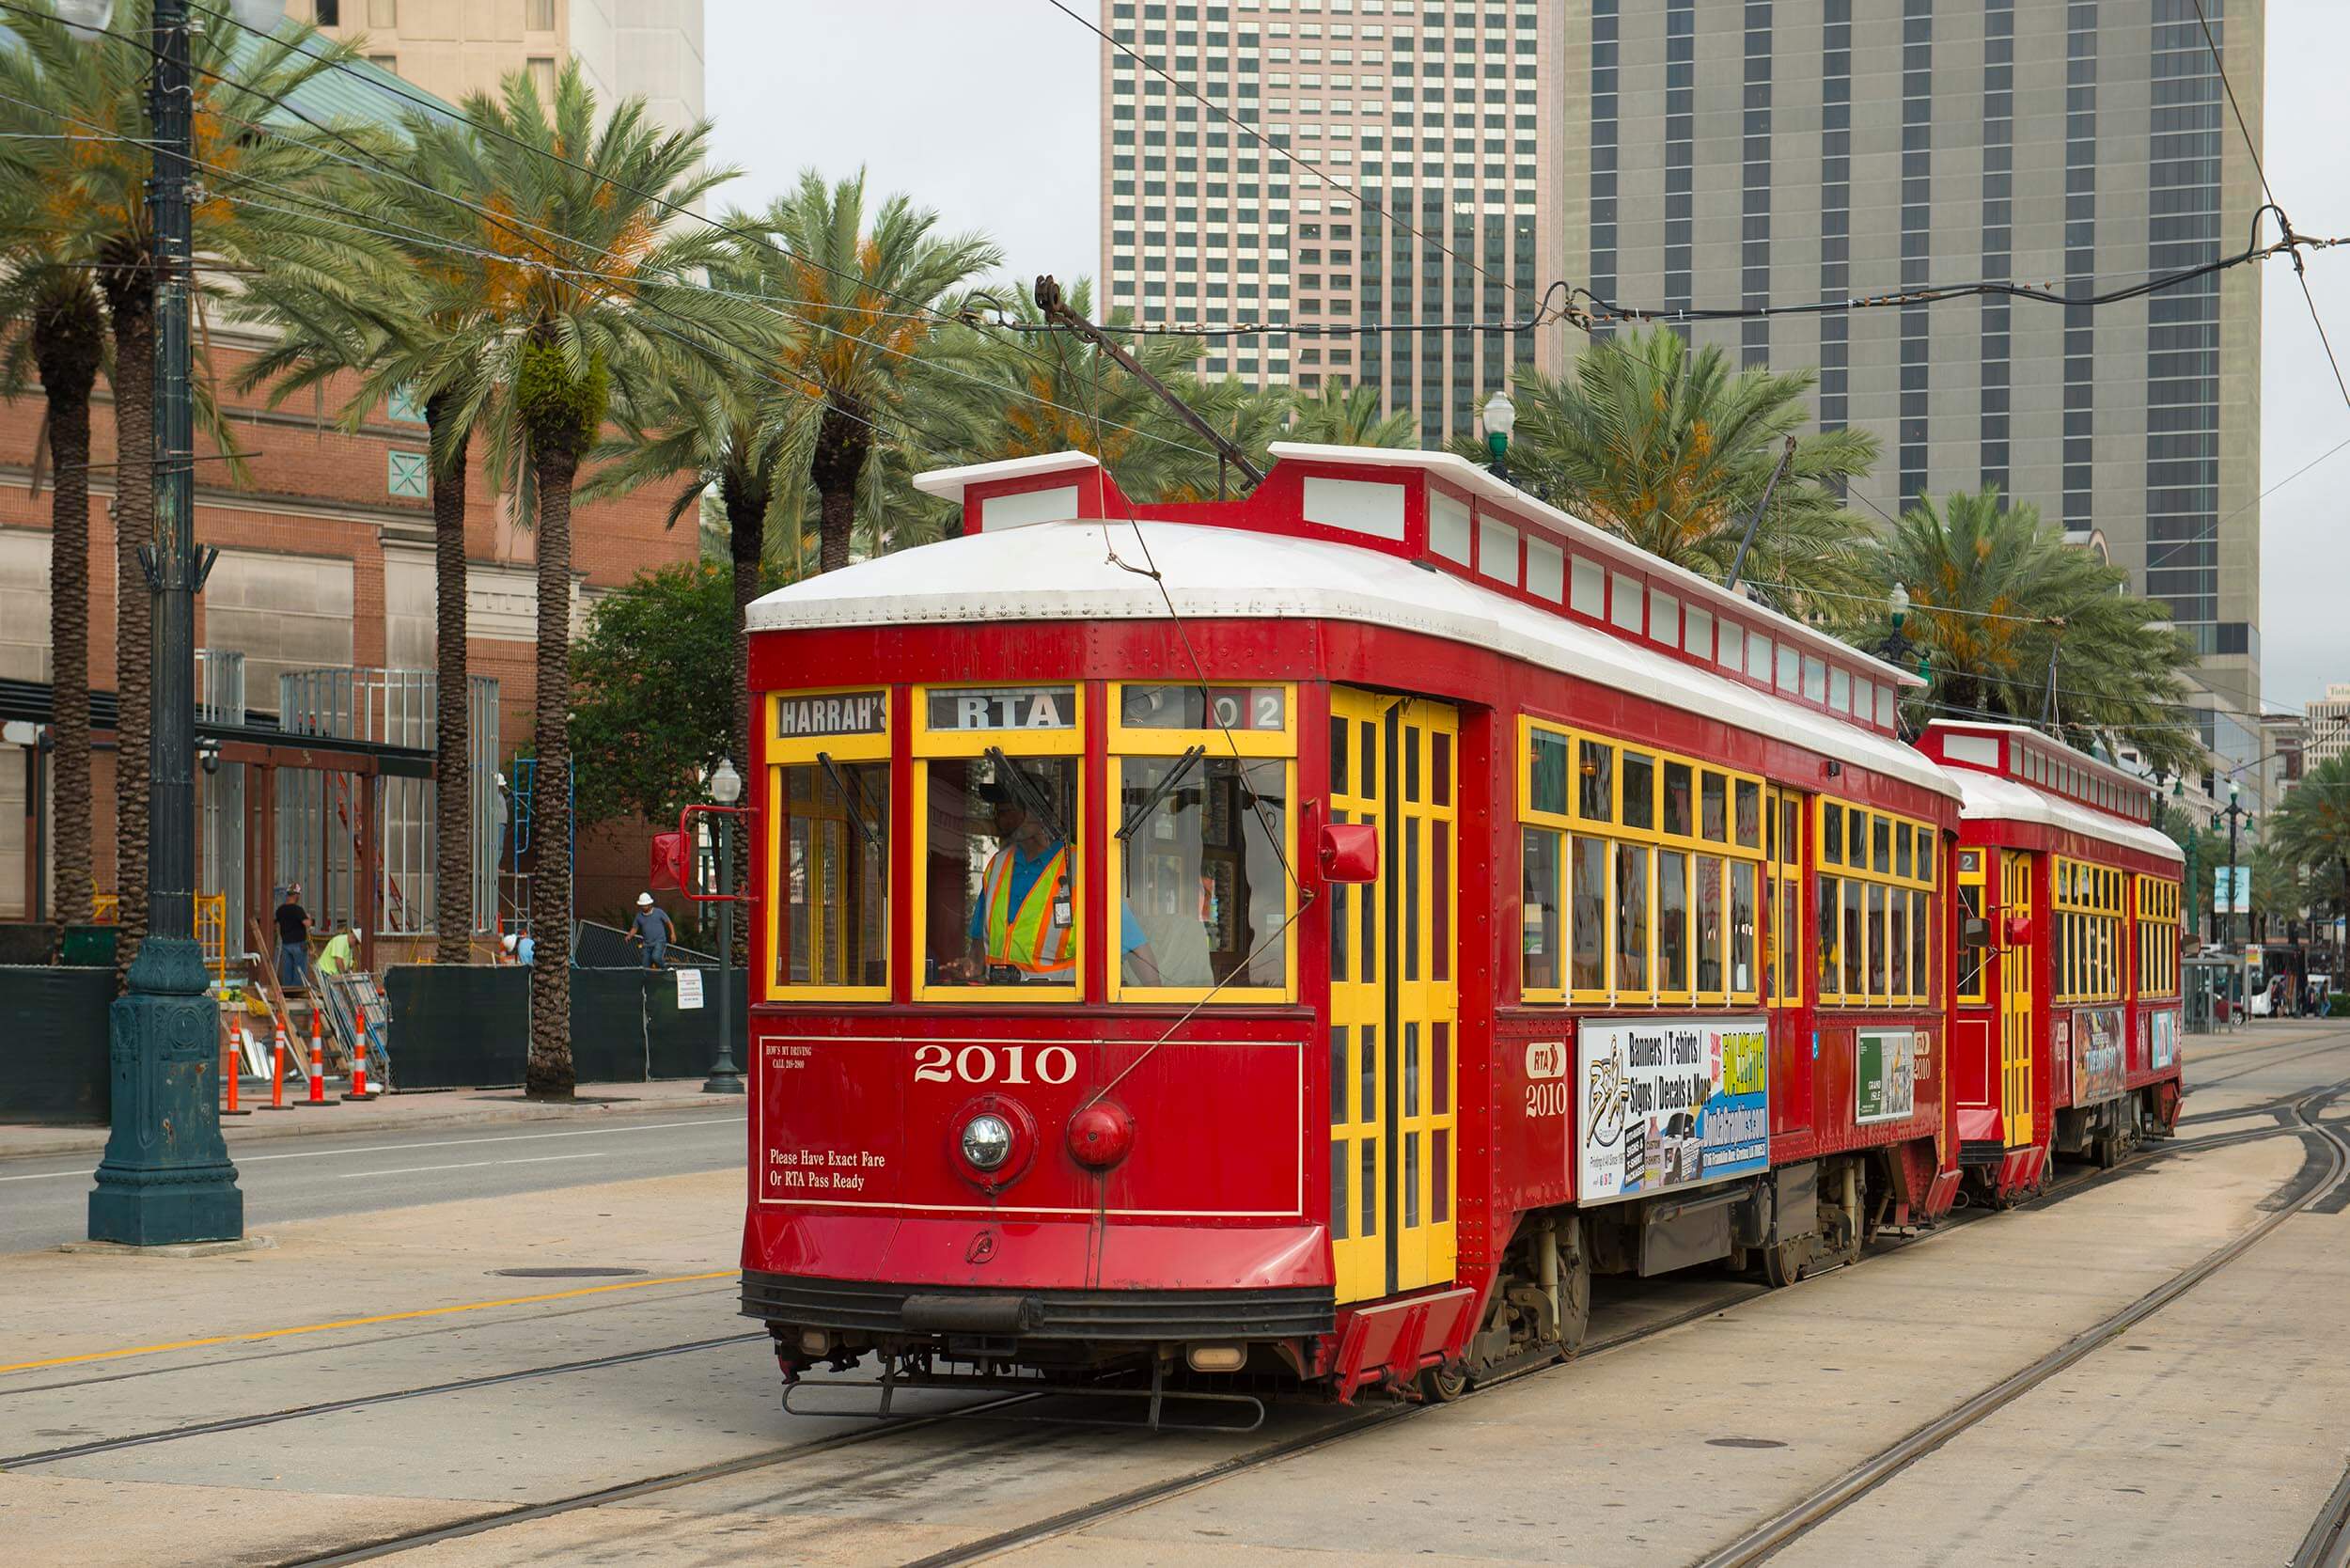 A trolley in greater New Orleans, LA